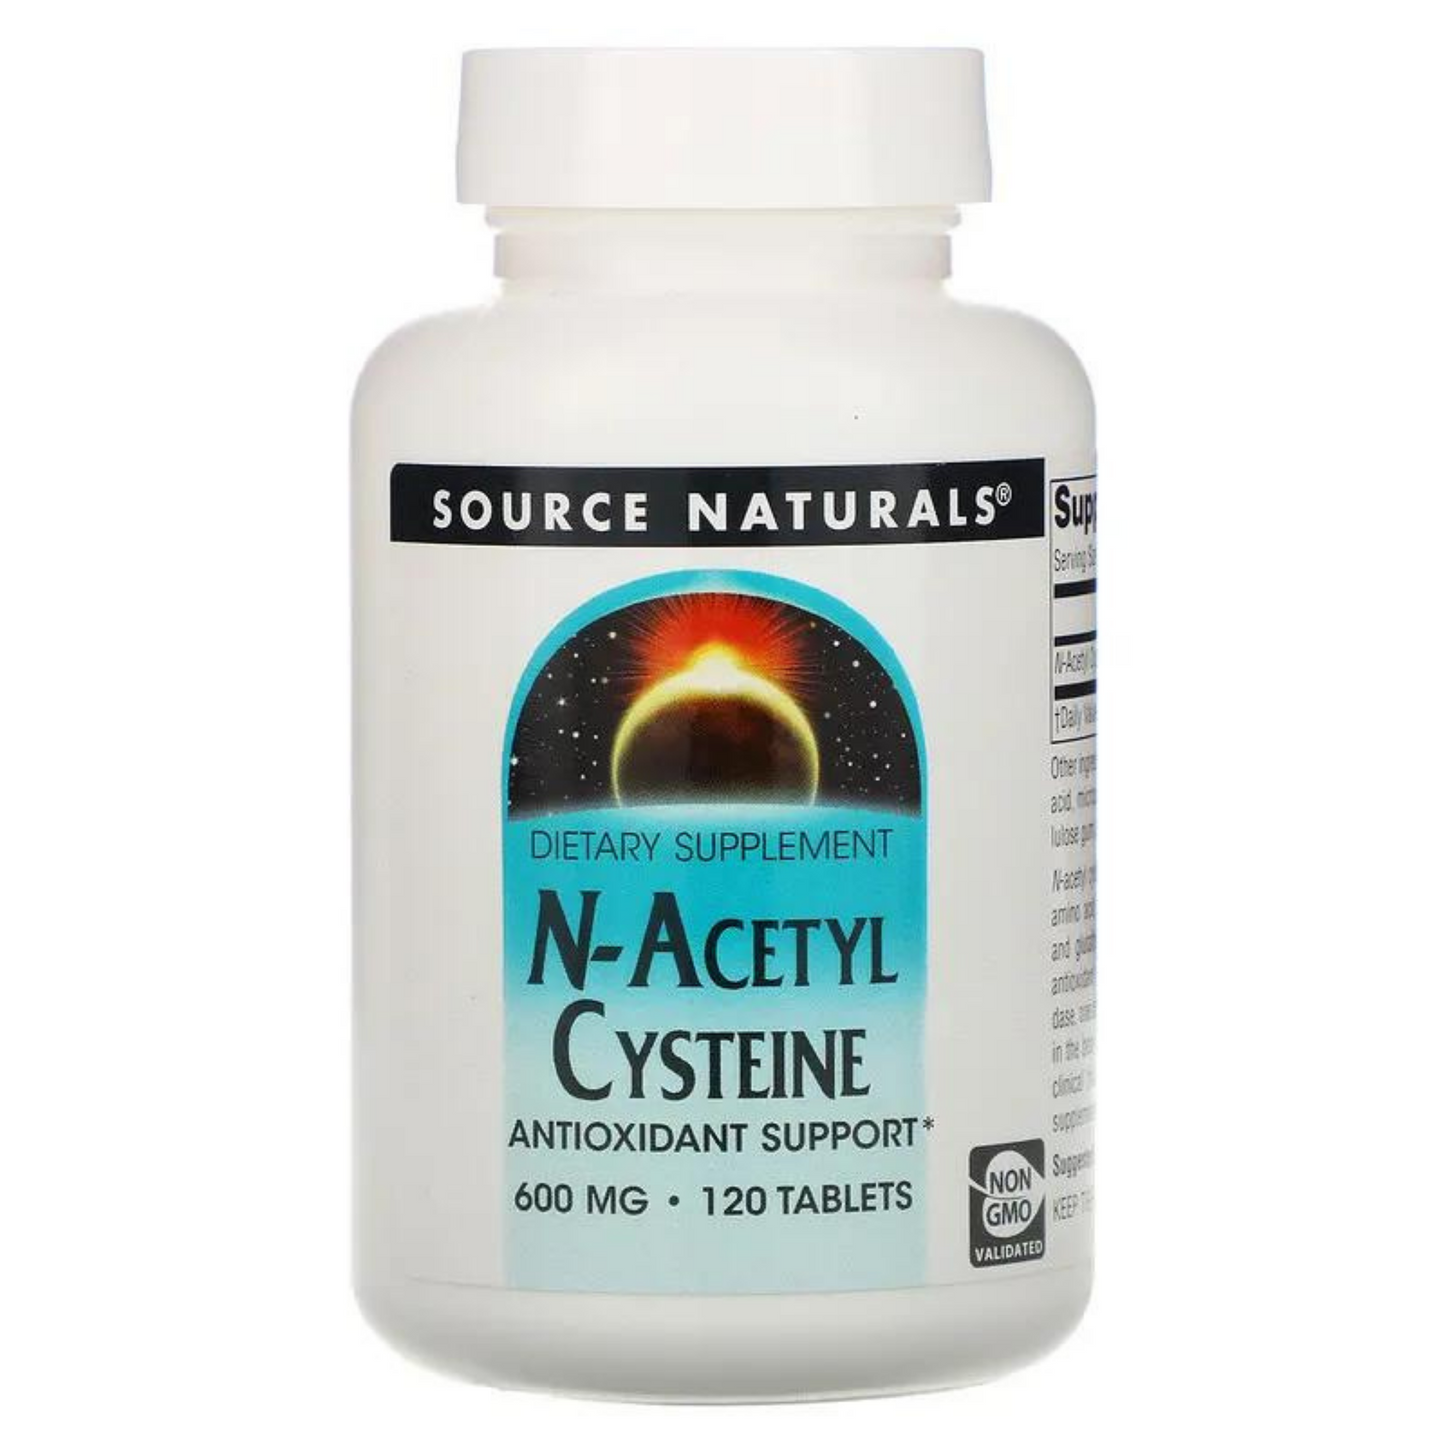 Primary Image of Source Naturals N-Acetyl Cysteine Tablets (60 count)